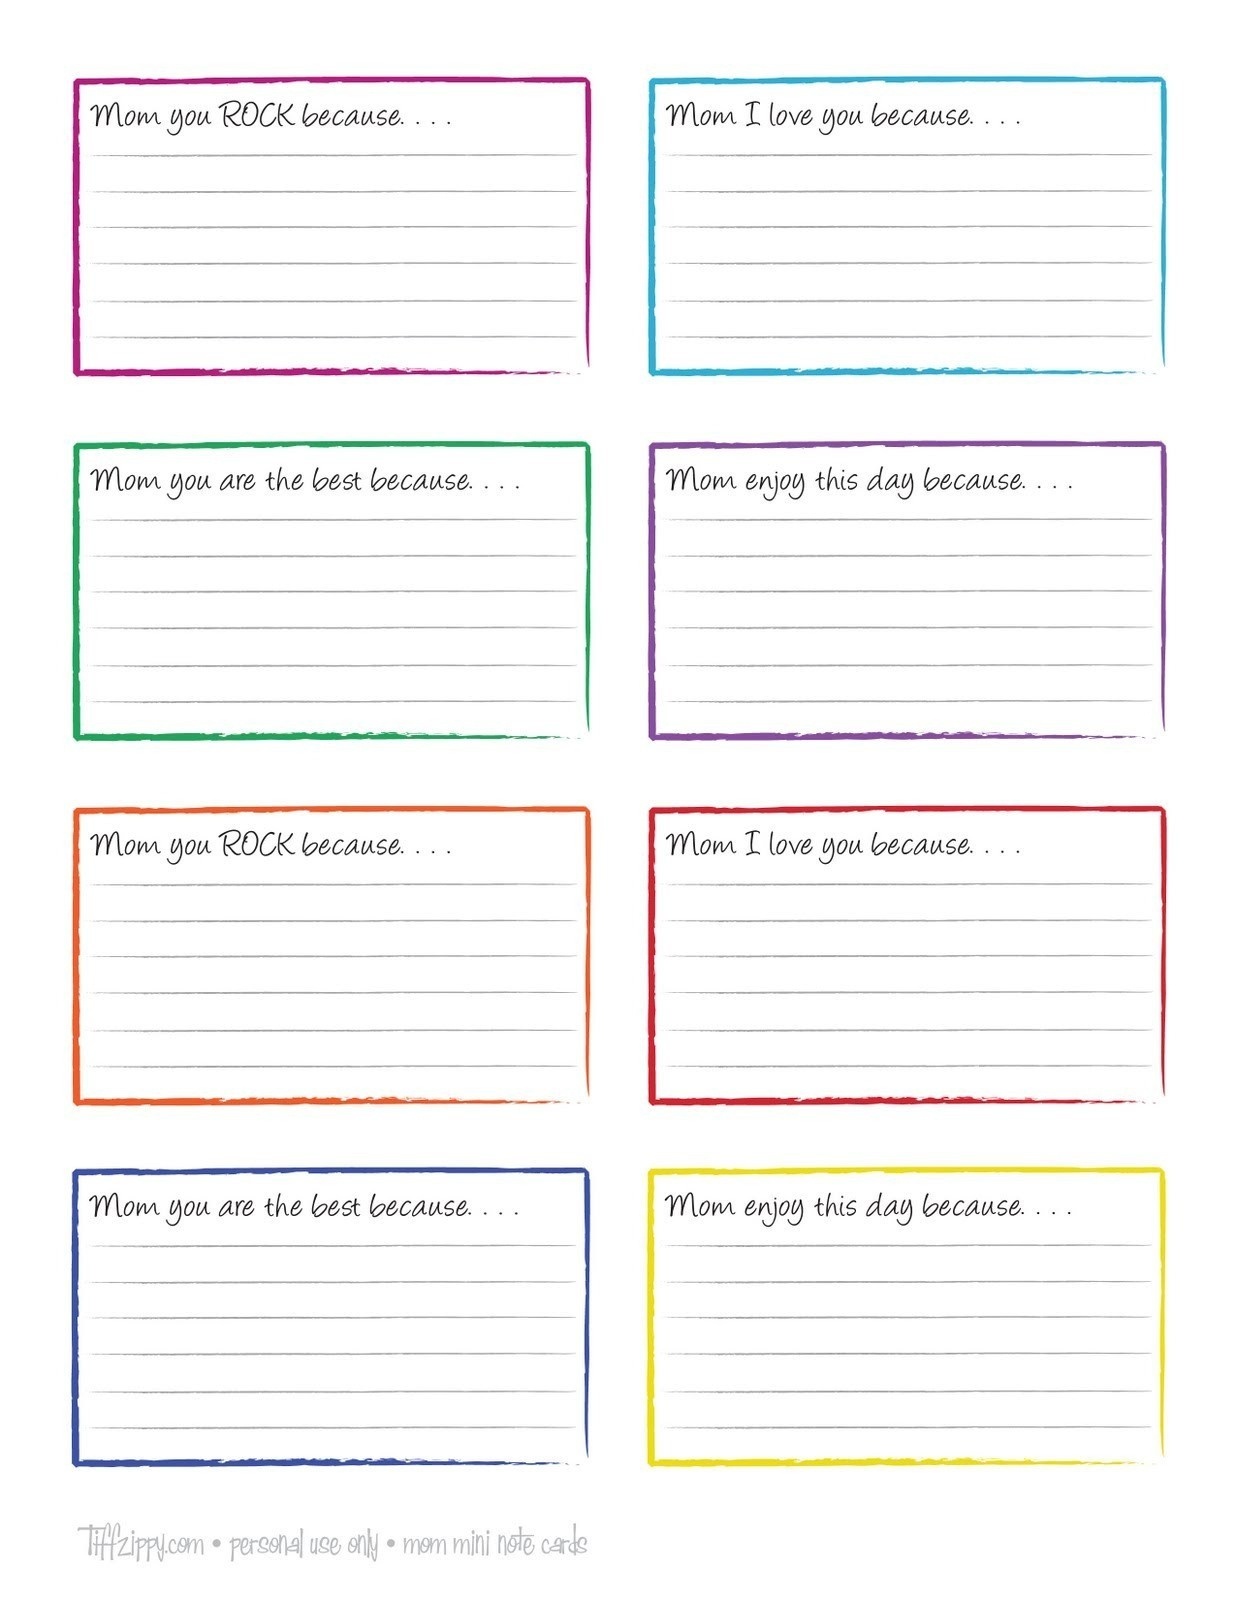 Template For Note Cards - Kaza.psstech.co - Free Printable Blank Index Cards